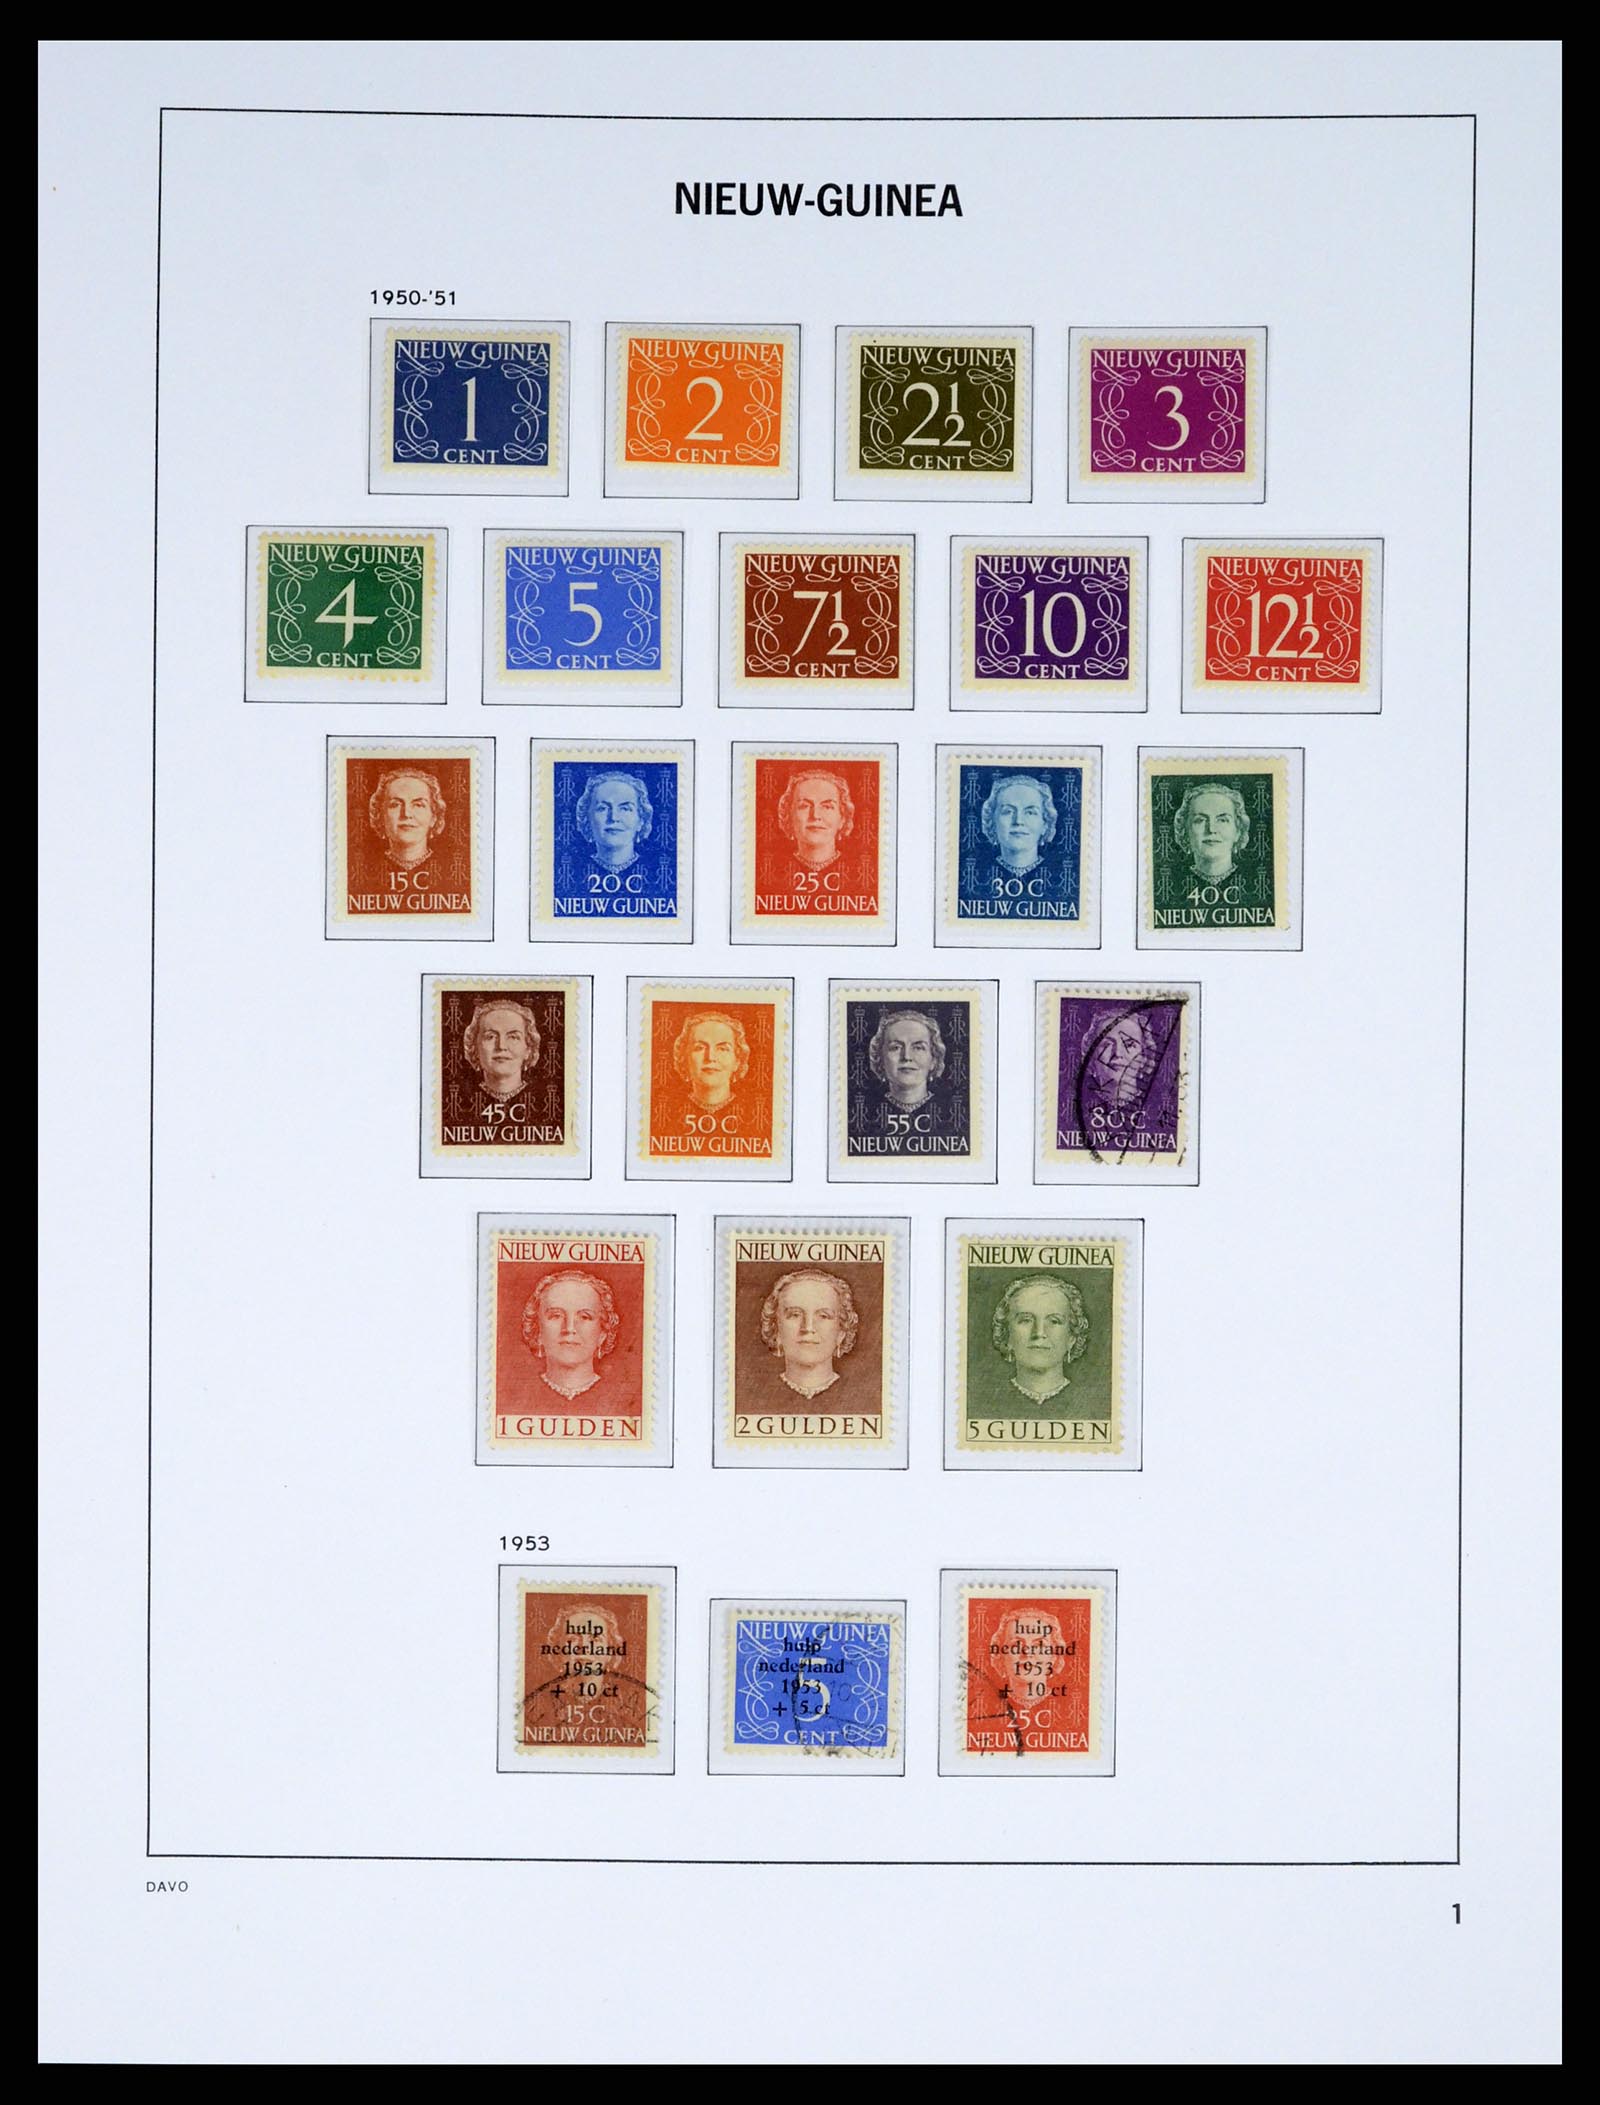 37332 034 - Stamp collection 37332 Dutch East Indies 1864-1949.